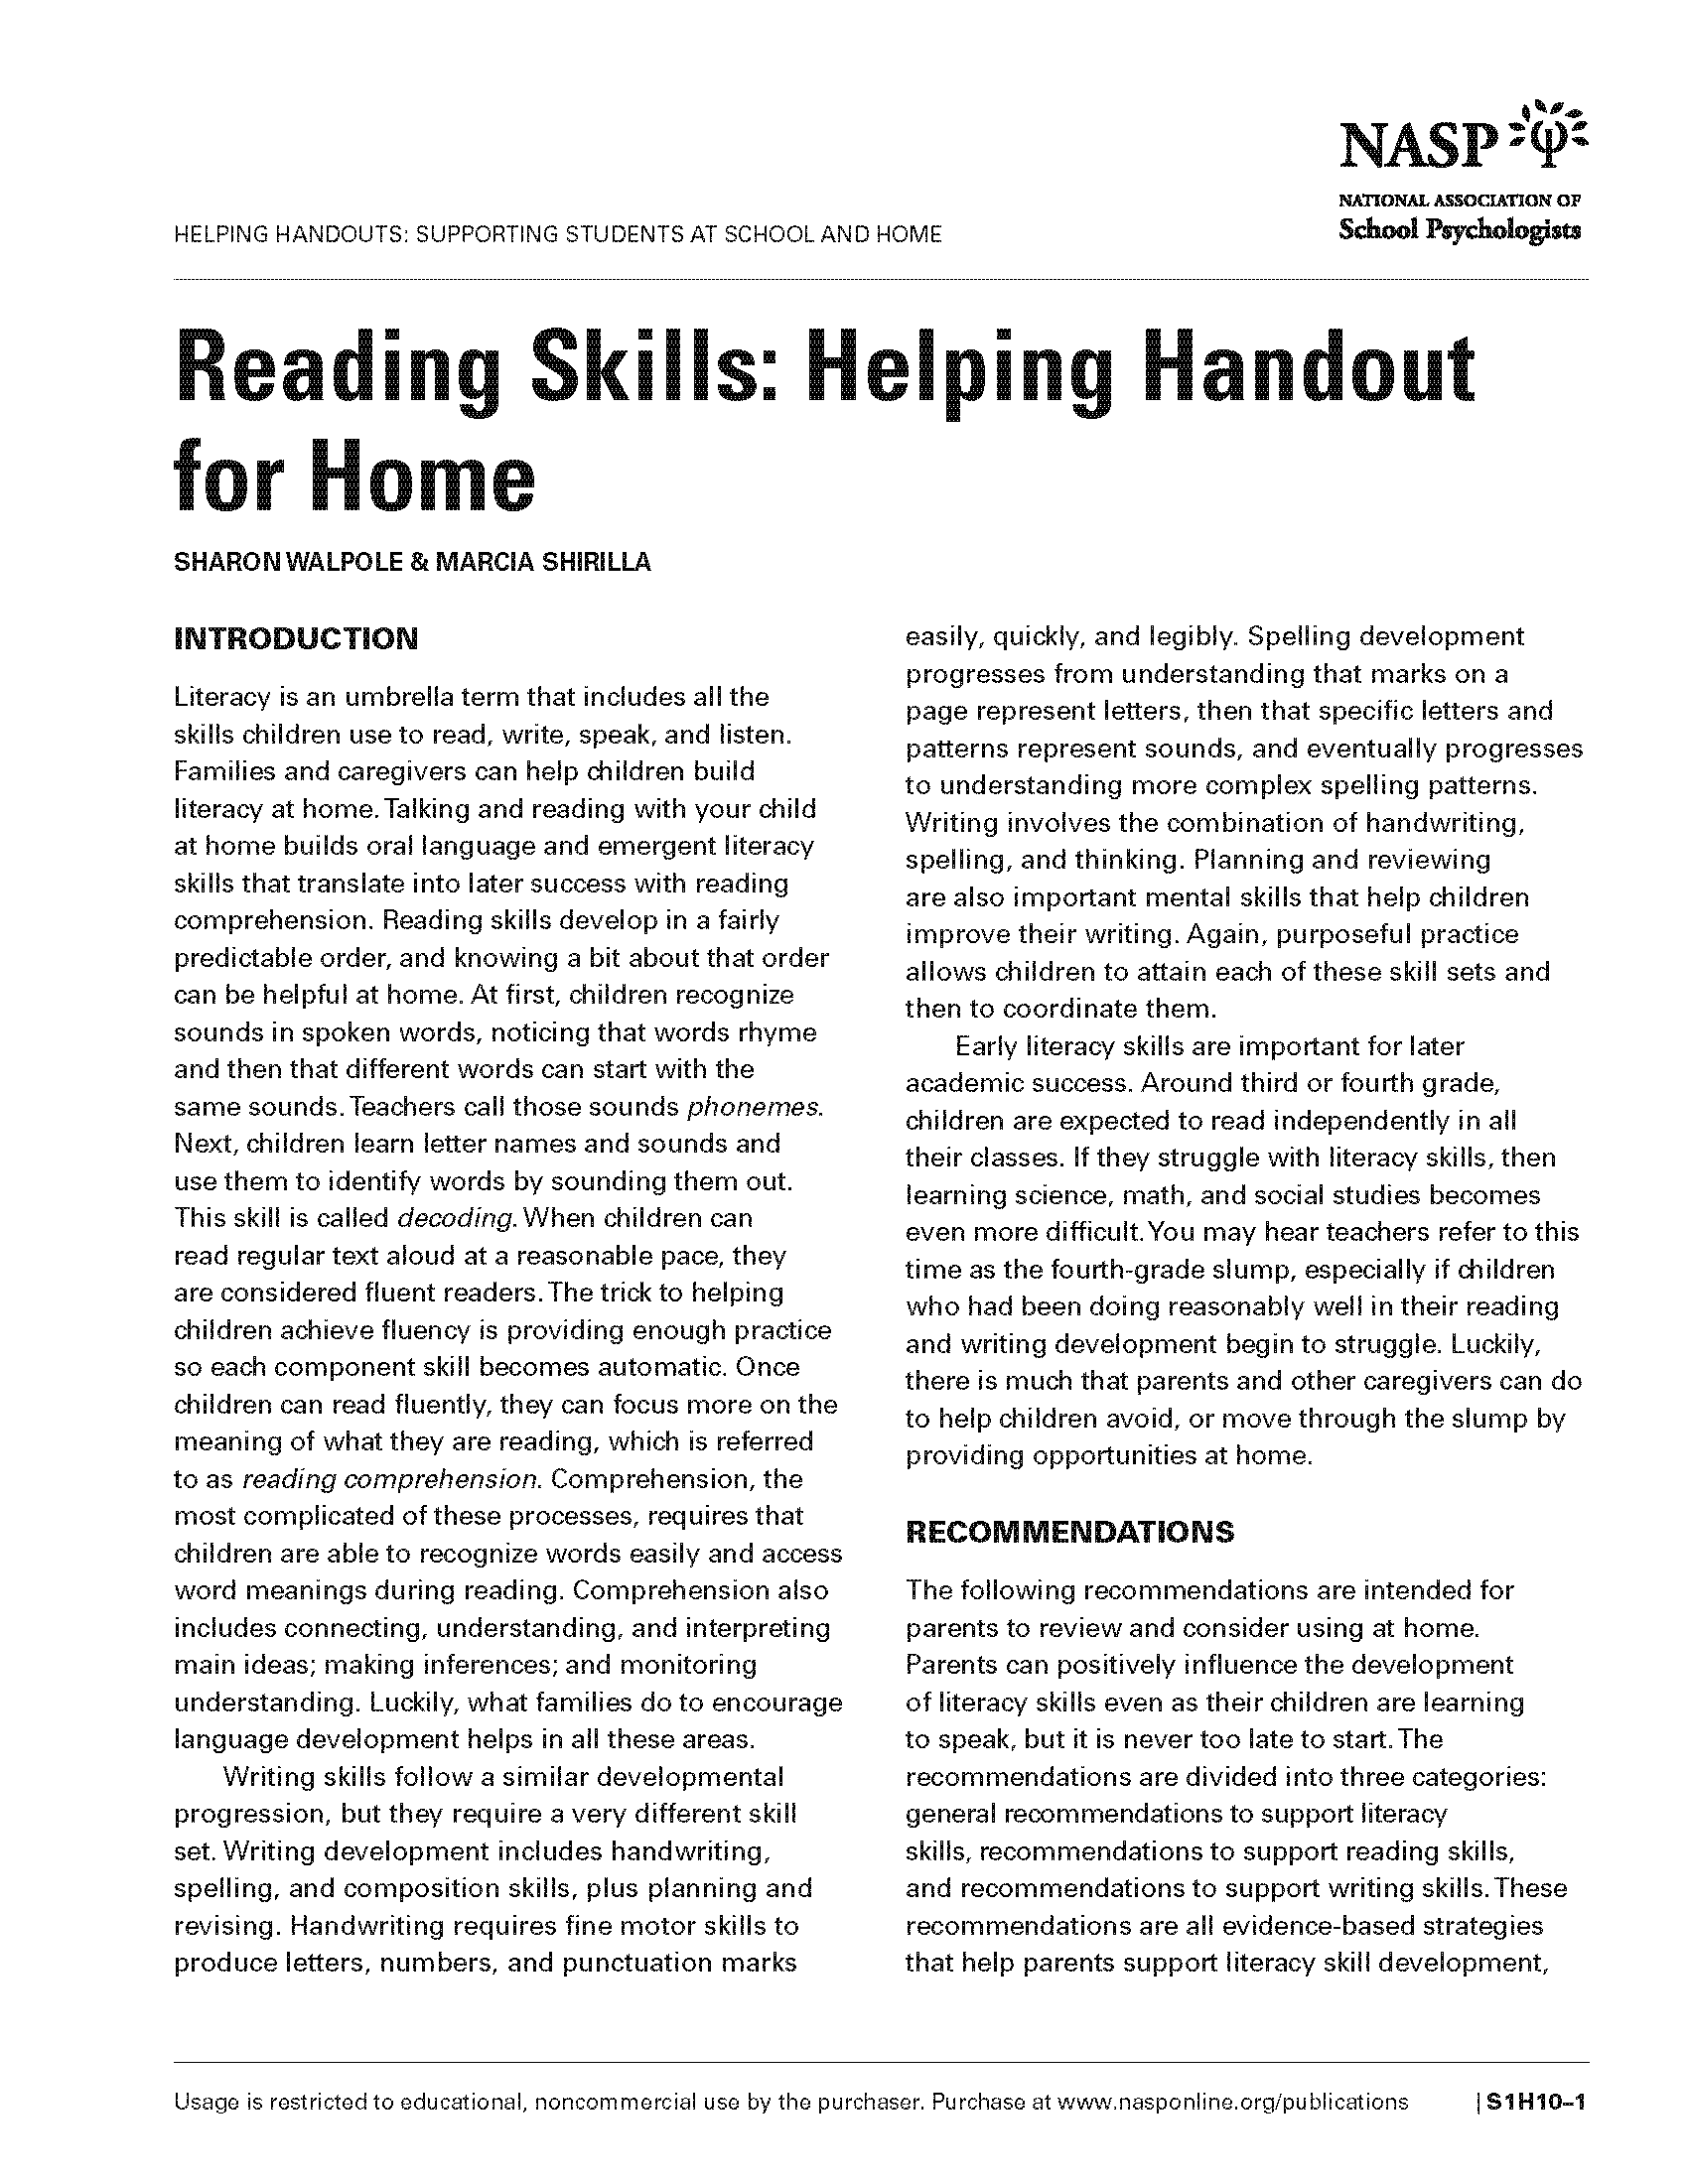 Reading Skills: Helping Handout for Home